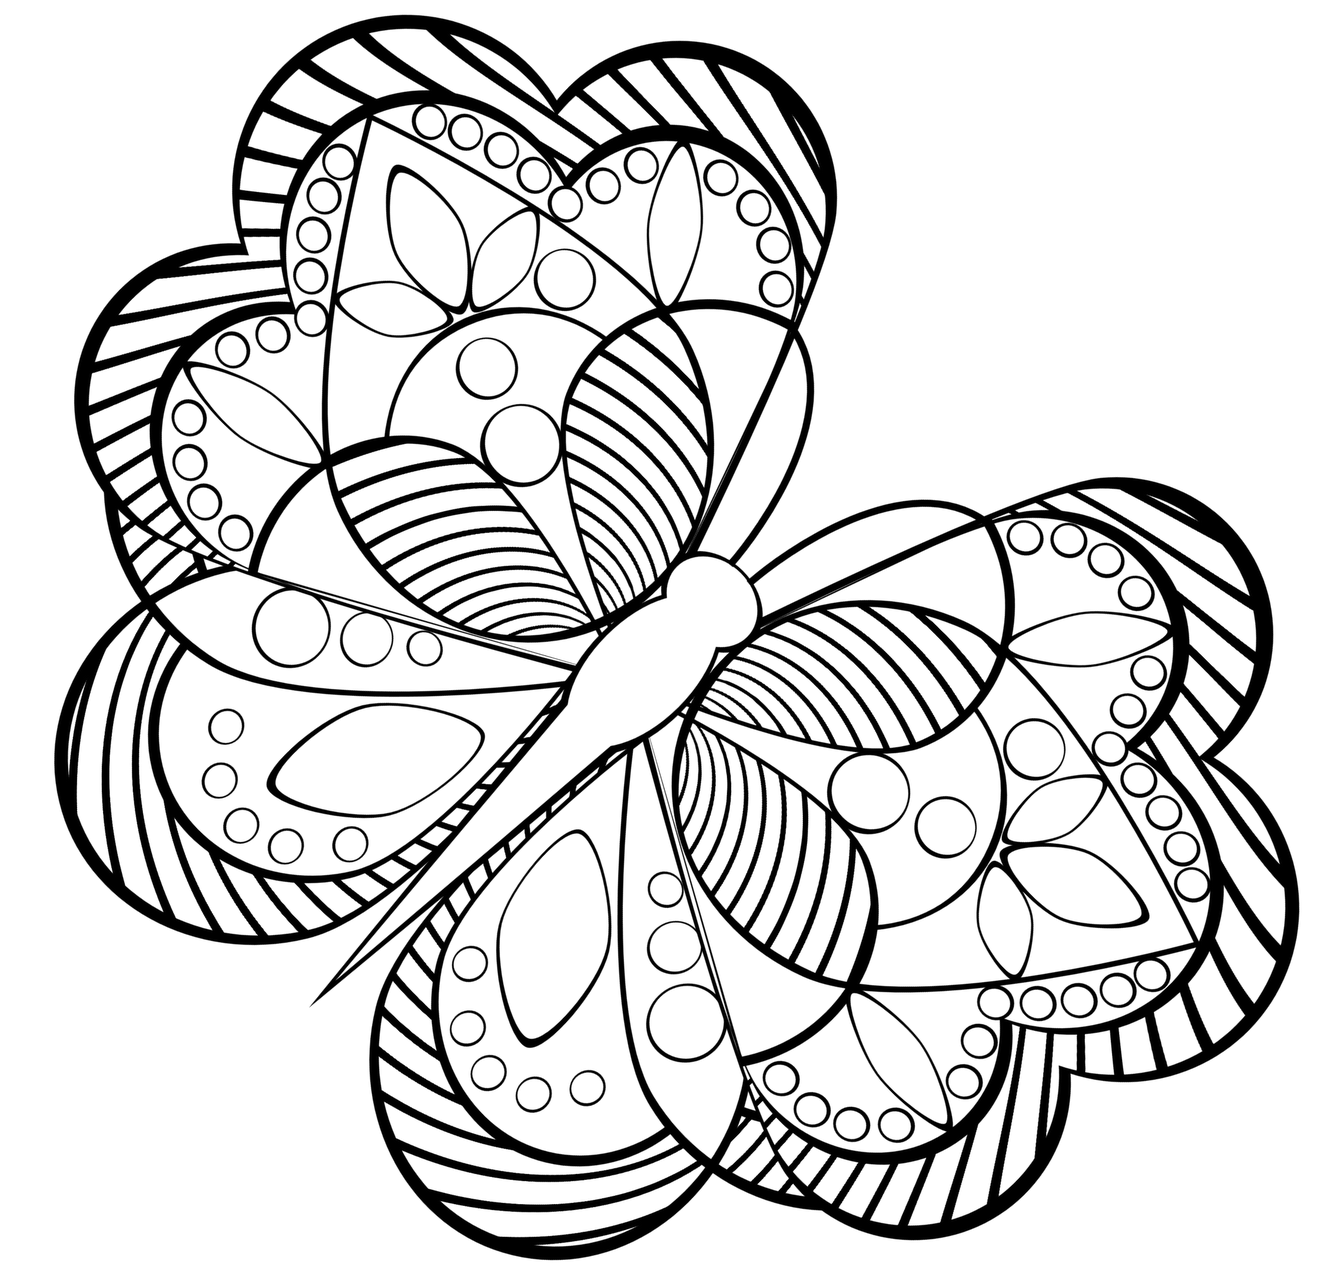 Animal Coloring Pages for Adults   Bestofcoloring.com   ClipArt ...